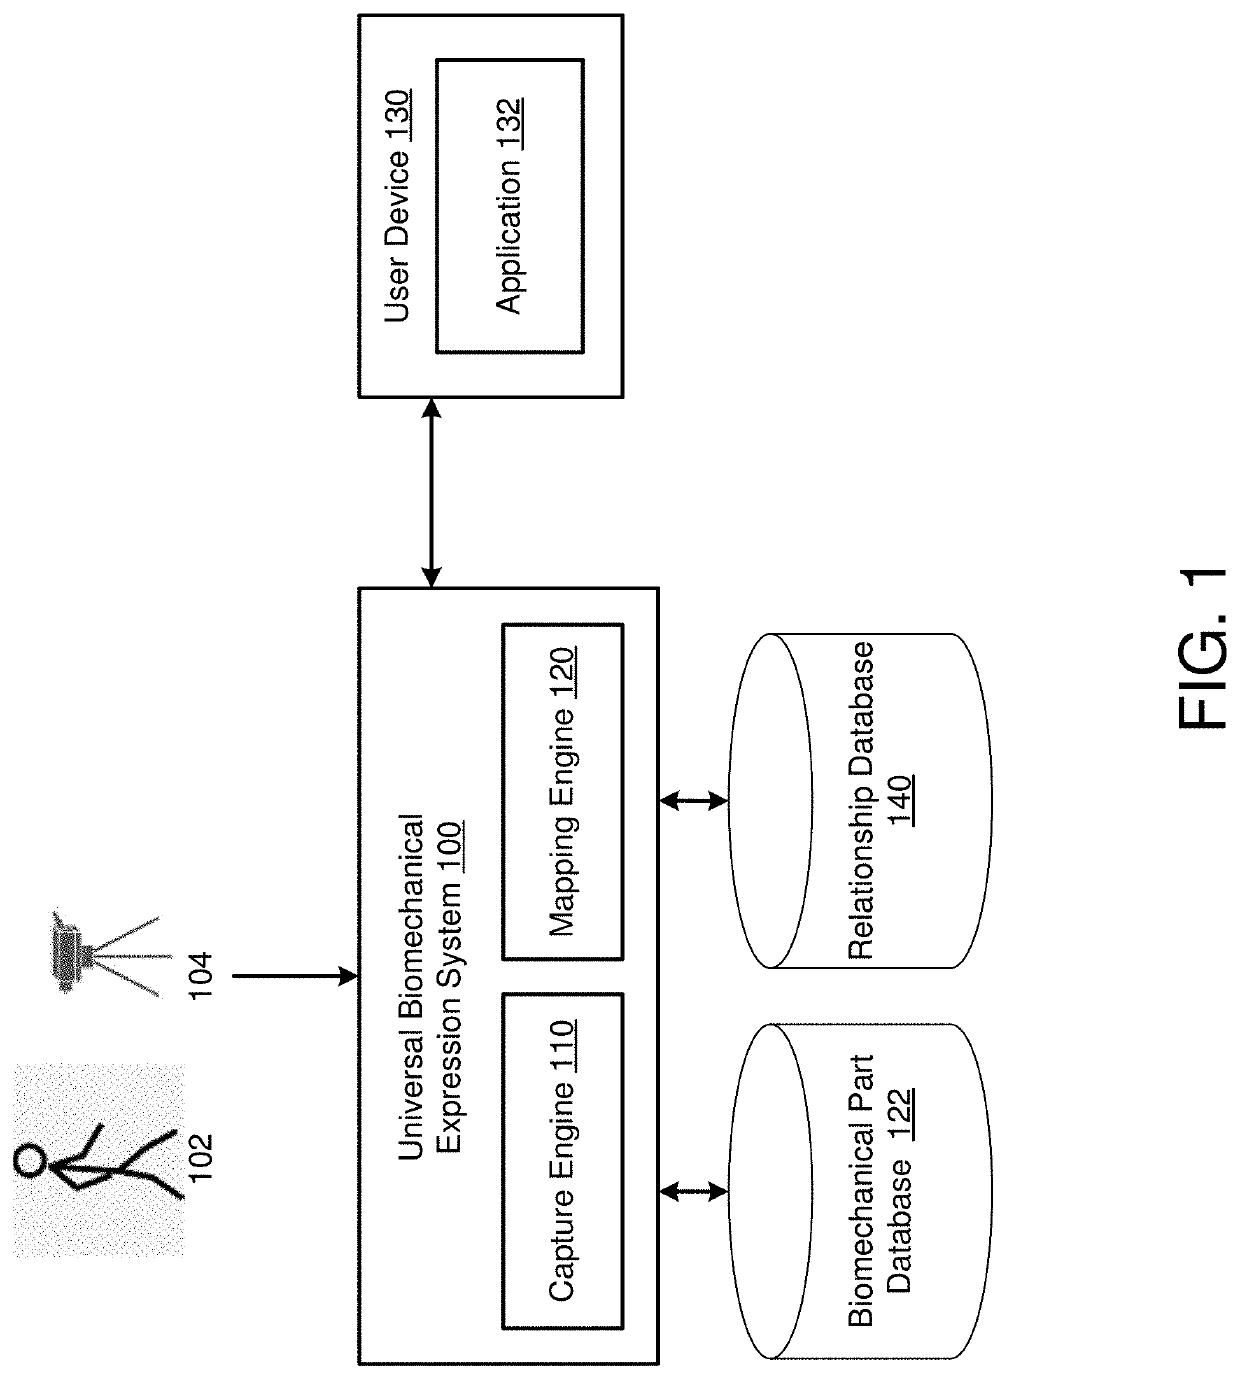 Universal body movement translation and character rendering system